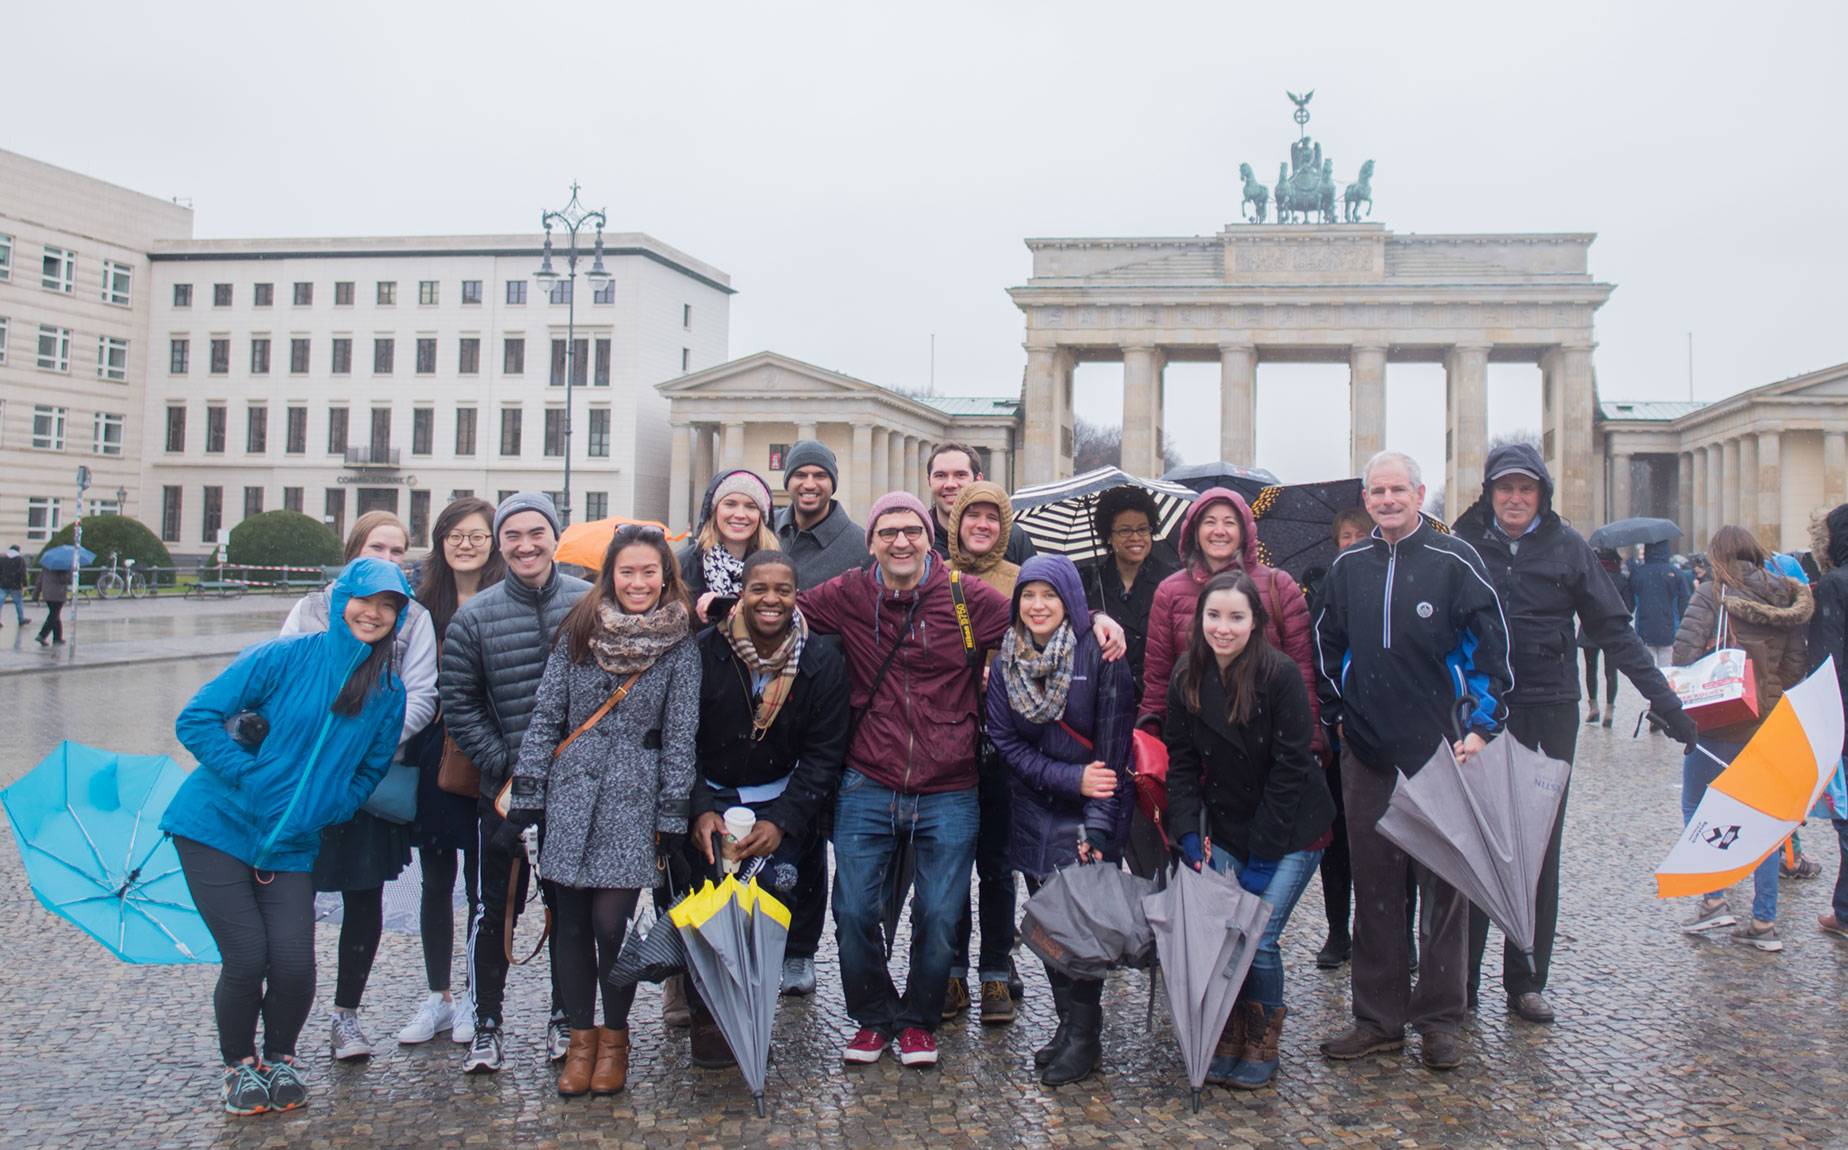 Princeton staff and students posing outside at the Princeton-Fung Global Forum in Berlin